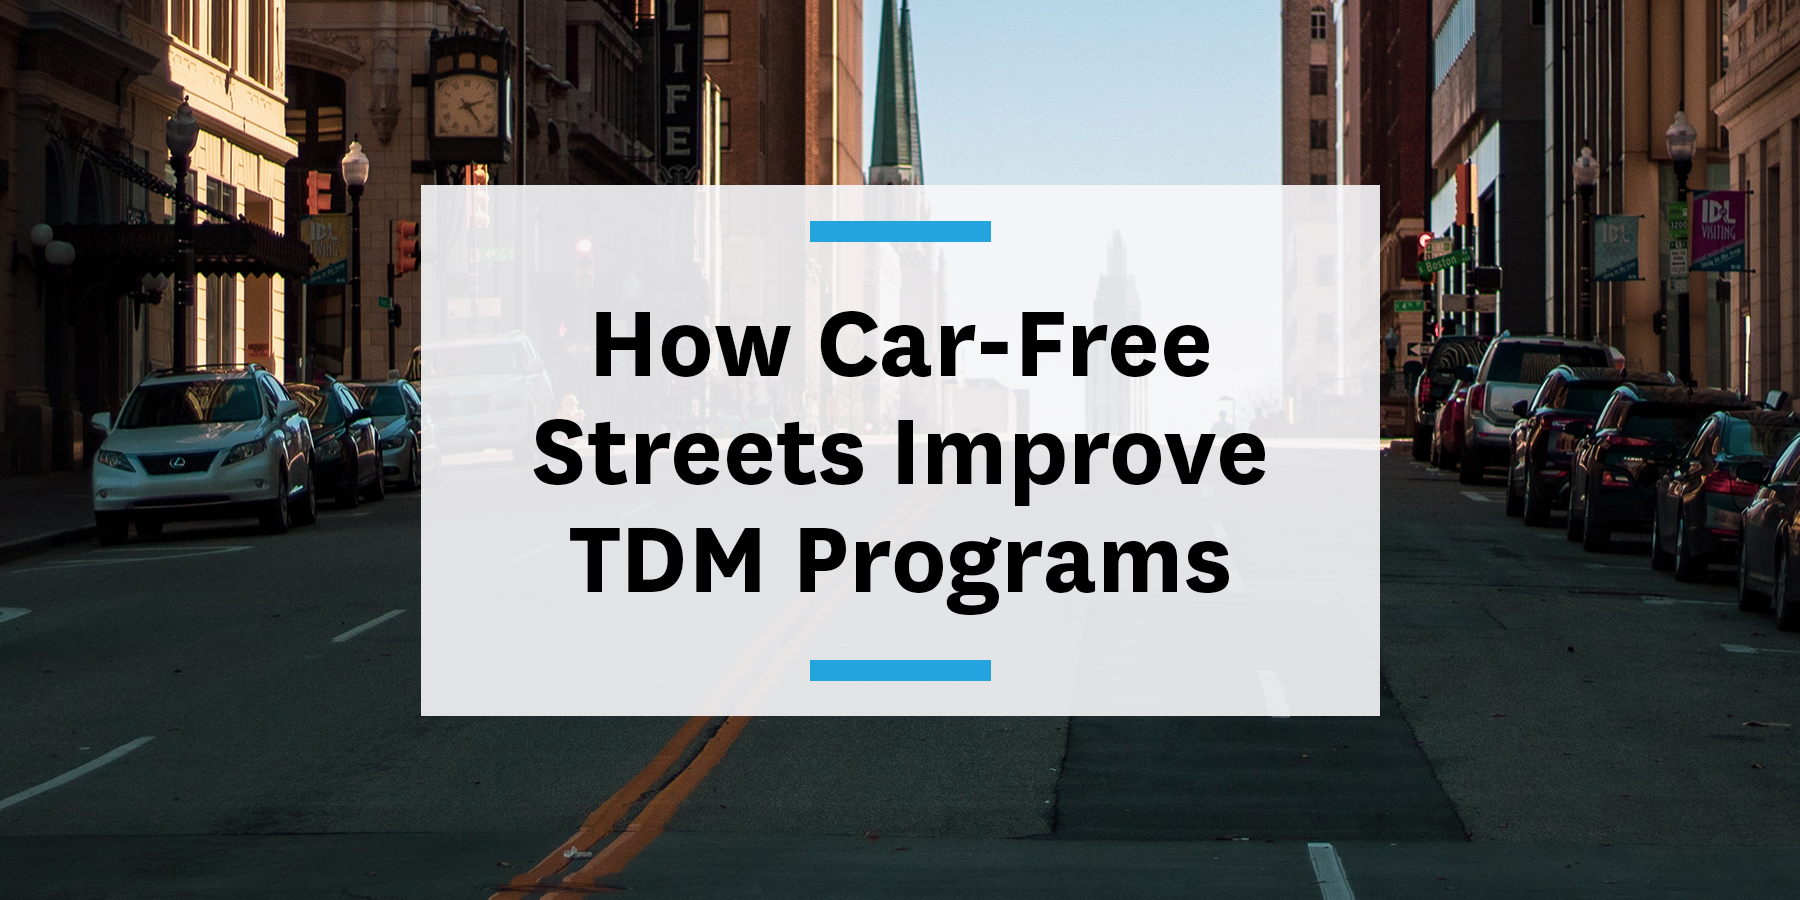 Feature image for how car-free streets improve TDM programs